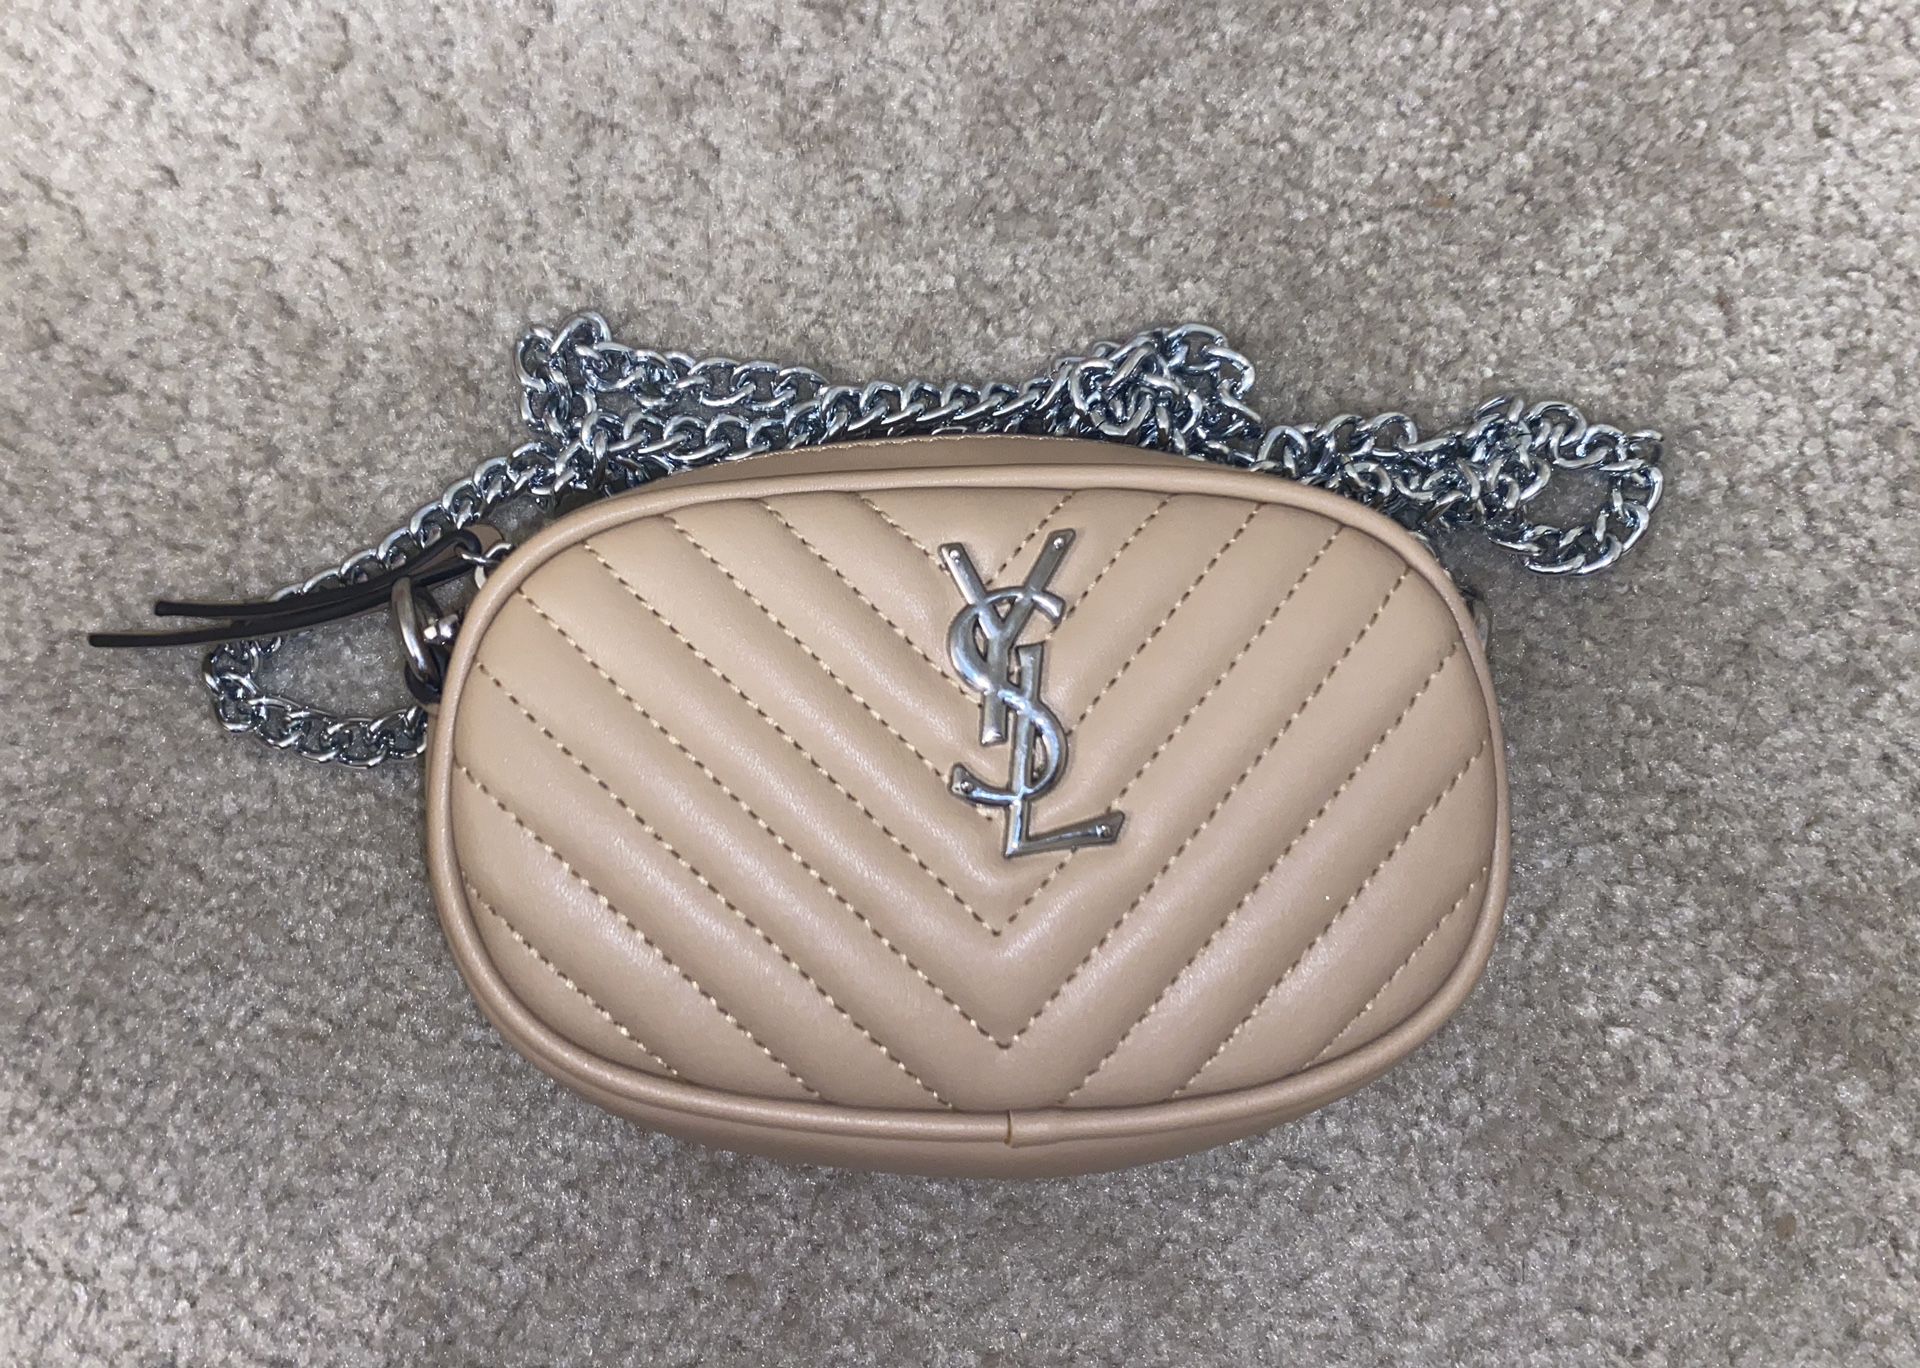 Ysl Bag, brand new,good condition,Never Used.